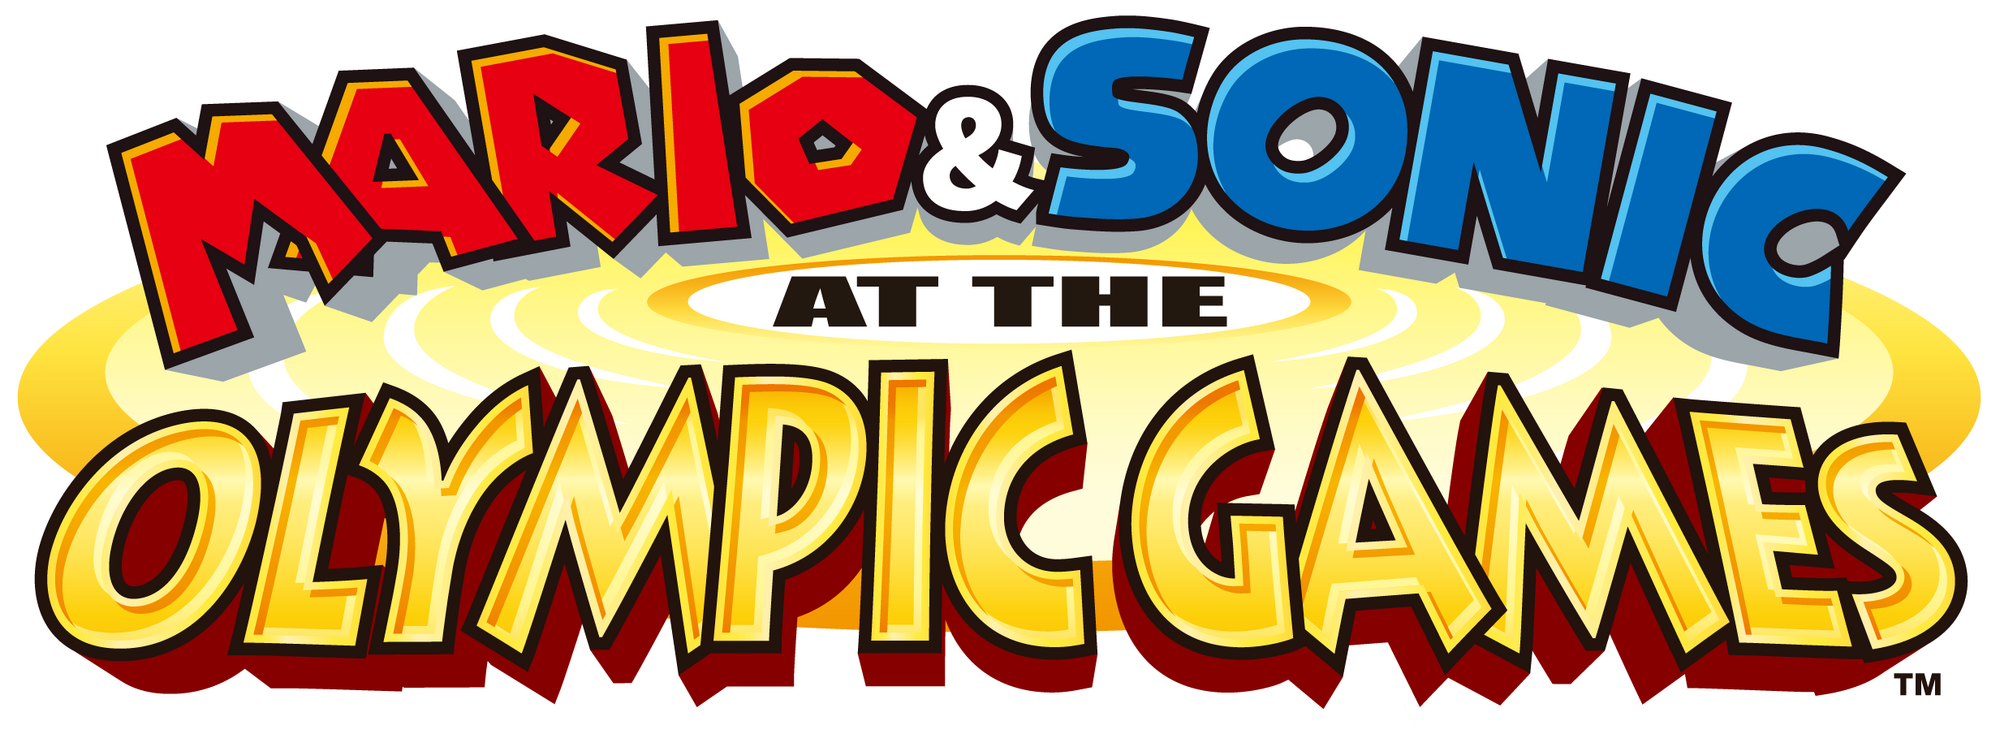 Image Mario & Sonic at the Olympic Games Logo.png Nintendo FANDOM